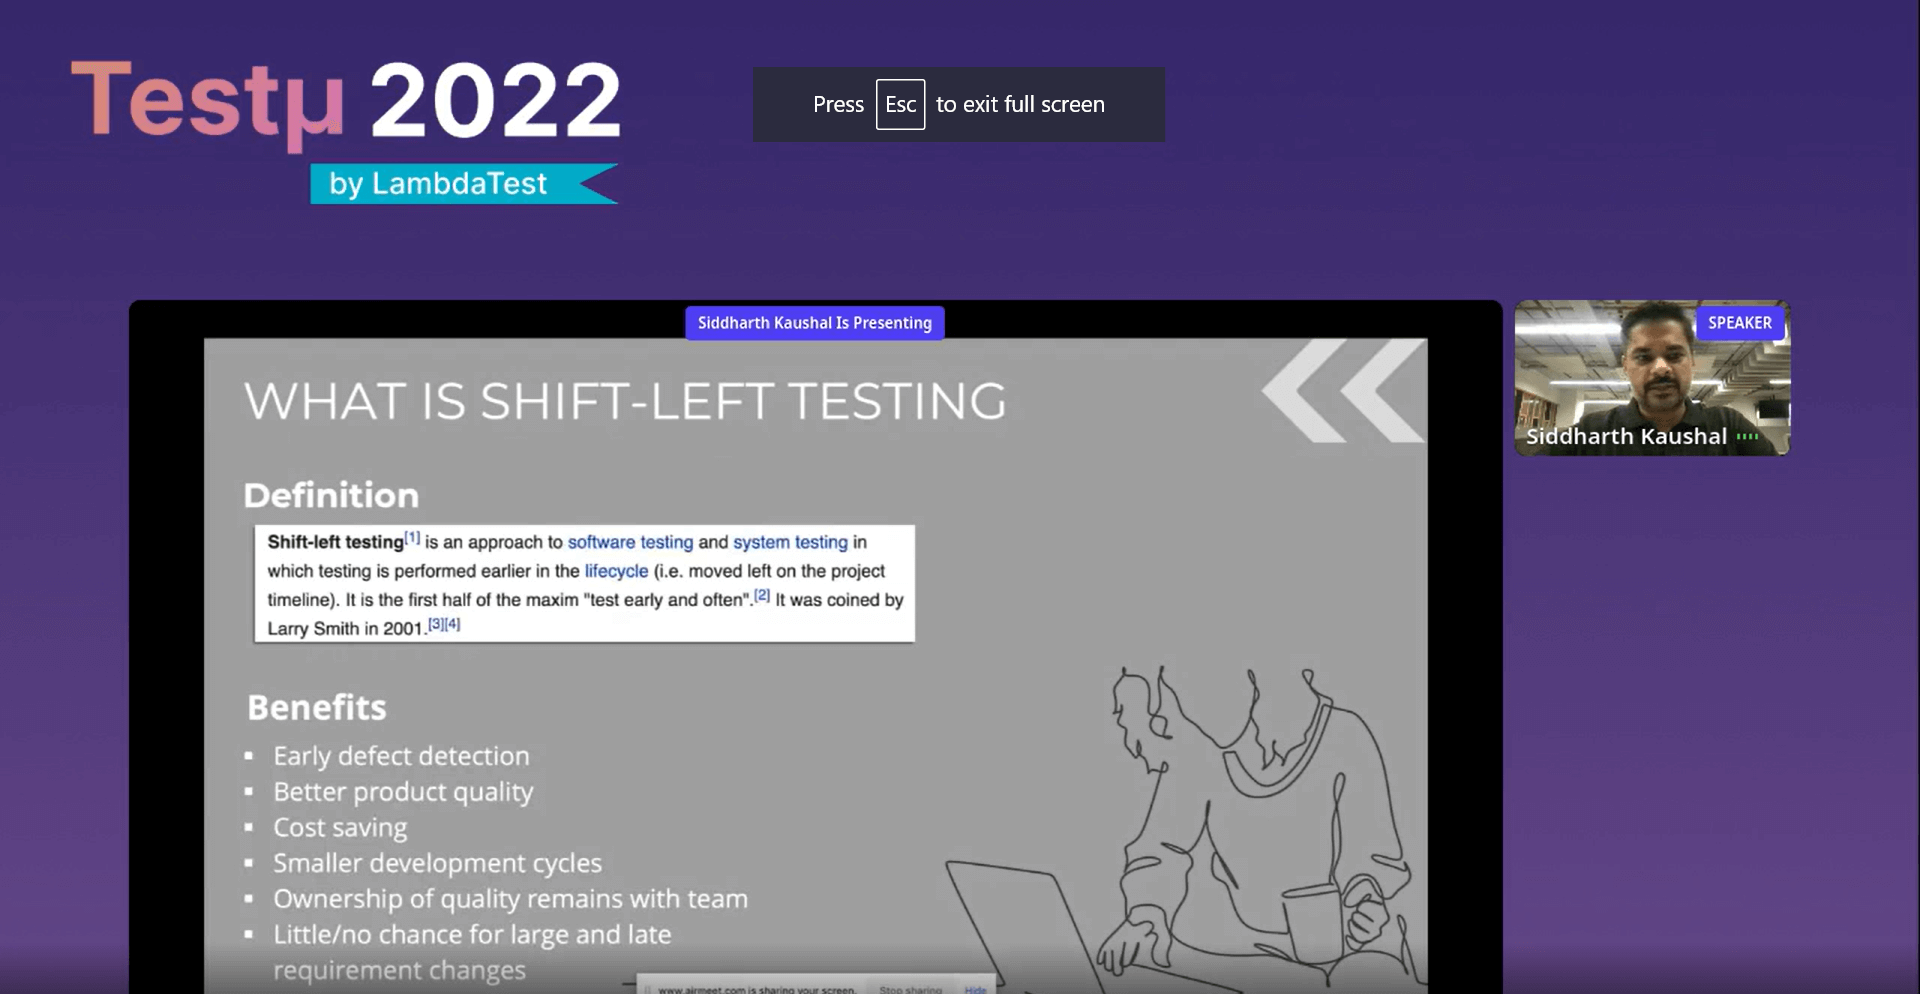 definition of Shift left testing and its benefits